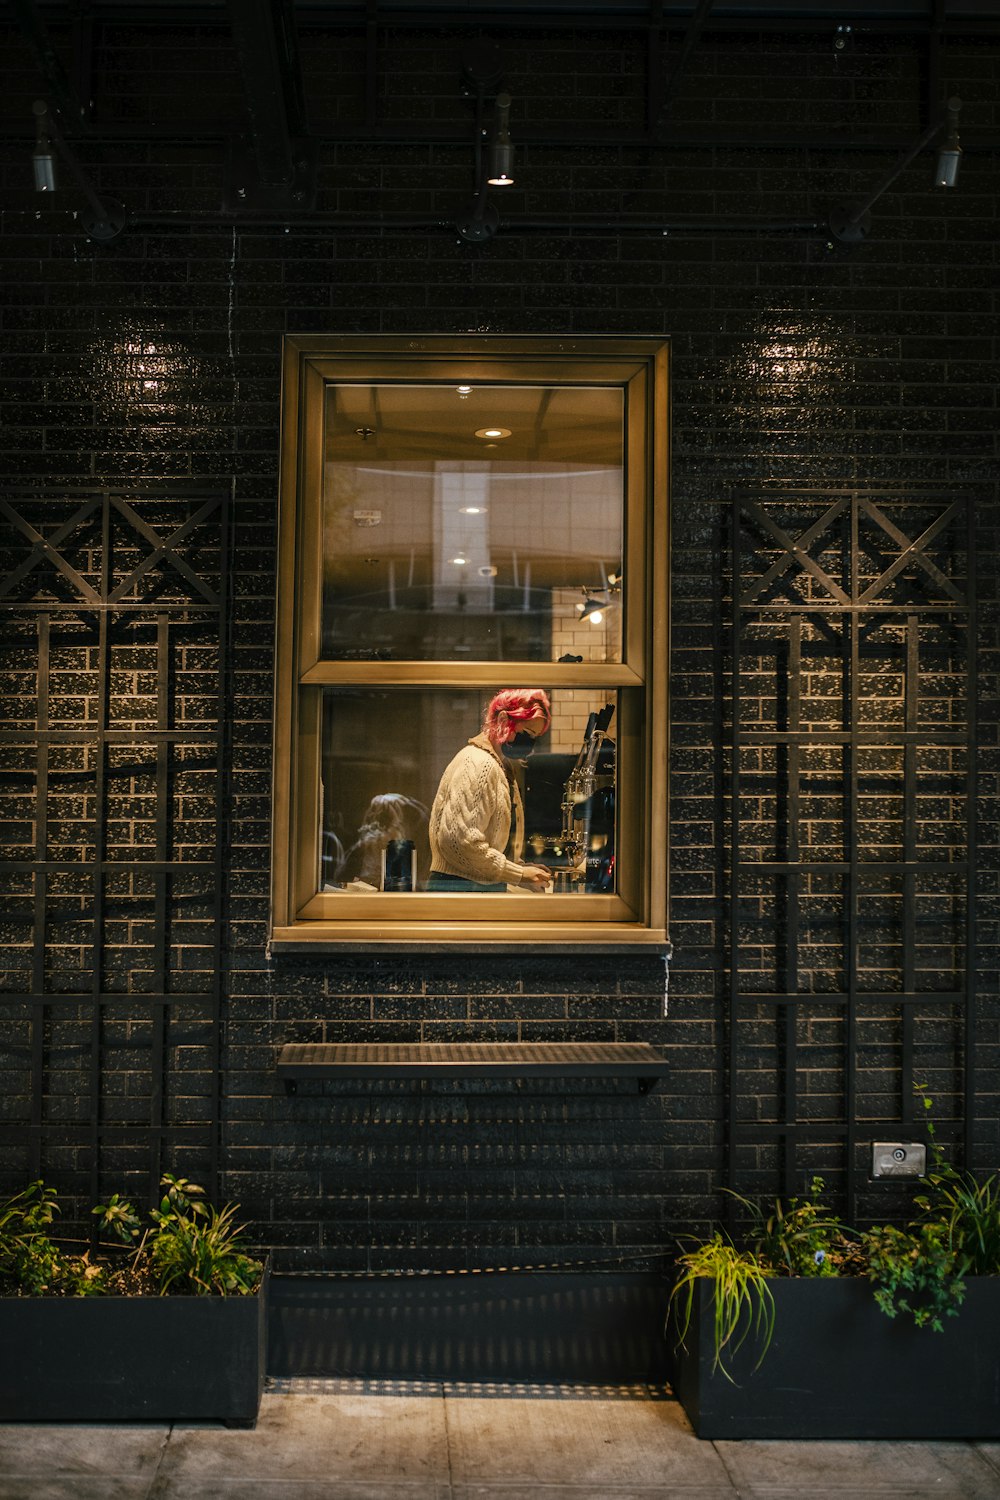 a person sitting in a window of a building